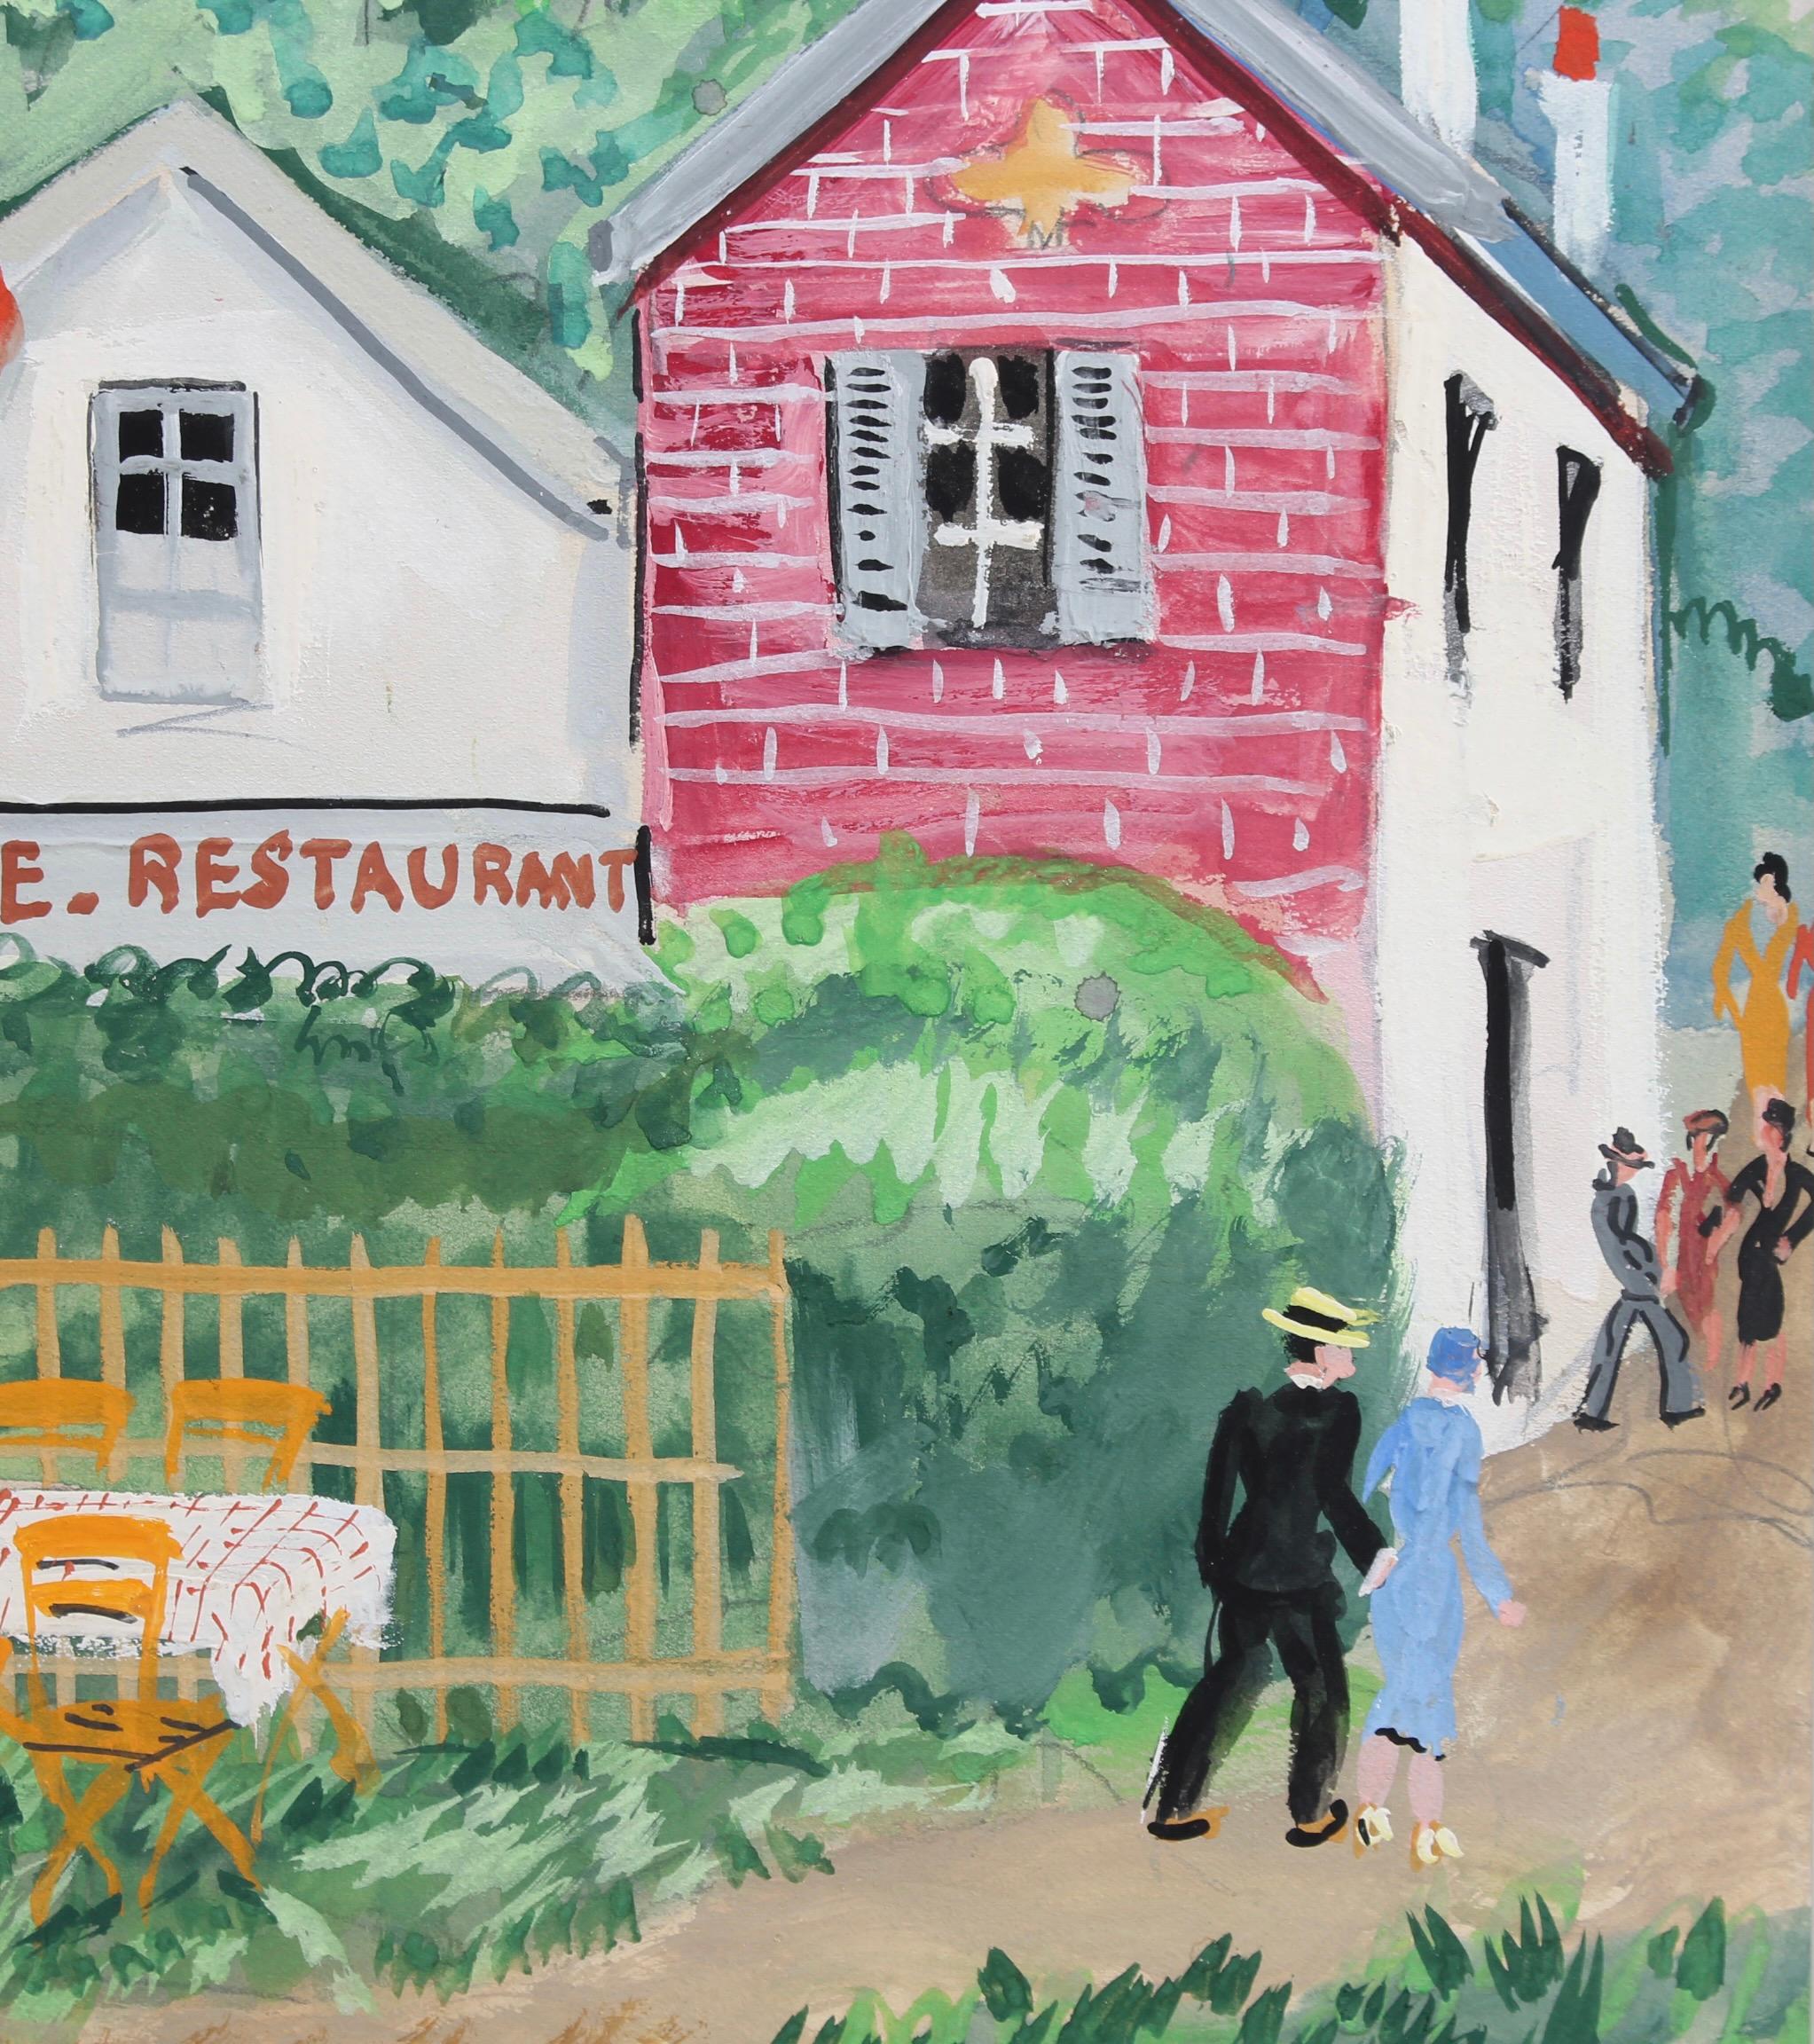 'Emile's Tavern', gouache on paper (circa 1930s), by Lucien Génin. A tavern in French is called a 'guinguette'. With the rise in living standards from the 1860s along with the development of public transport, guingettes set up in the Parisian